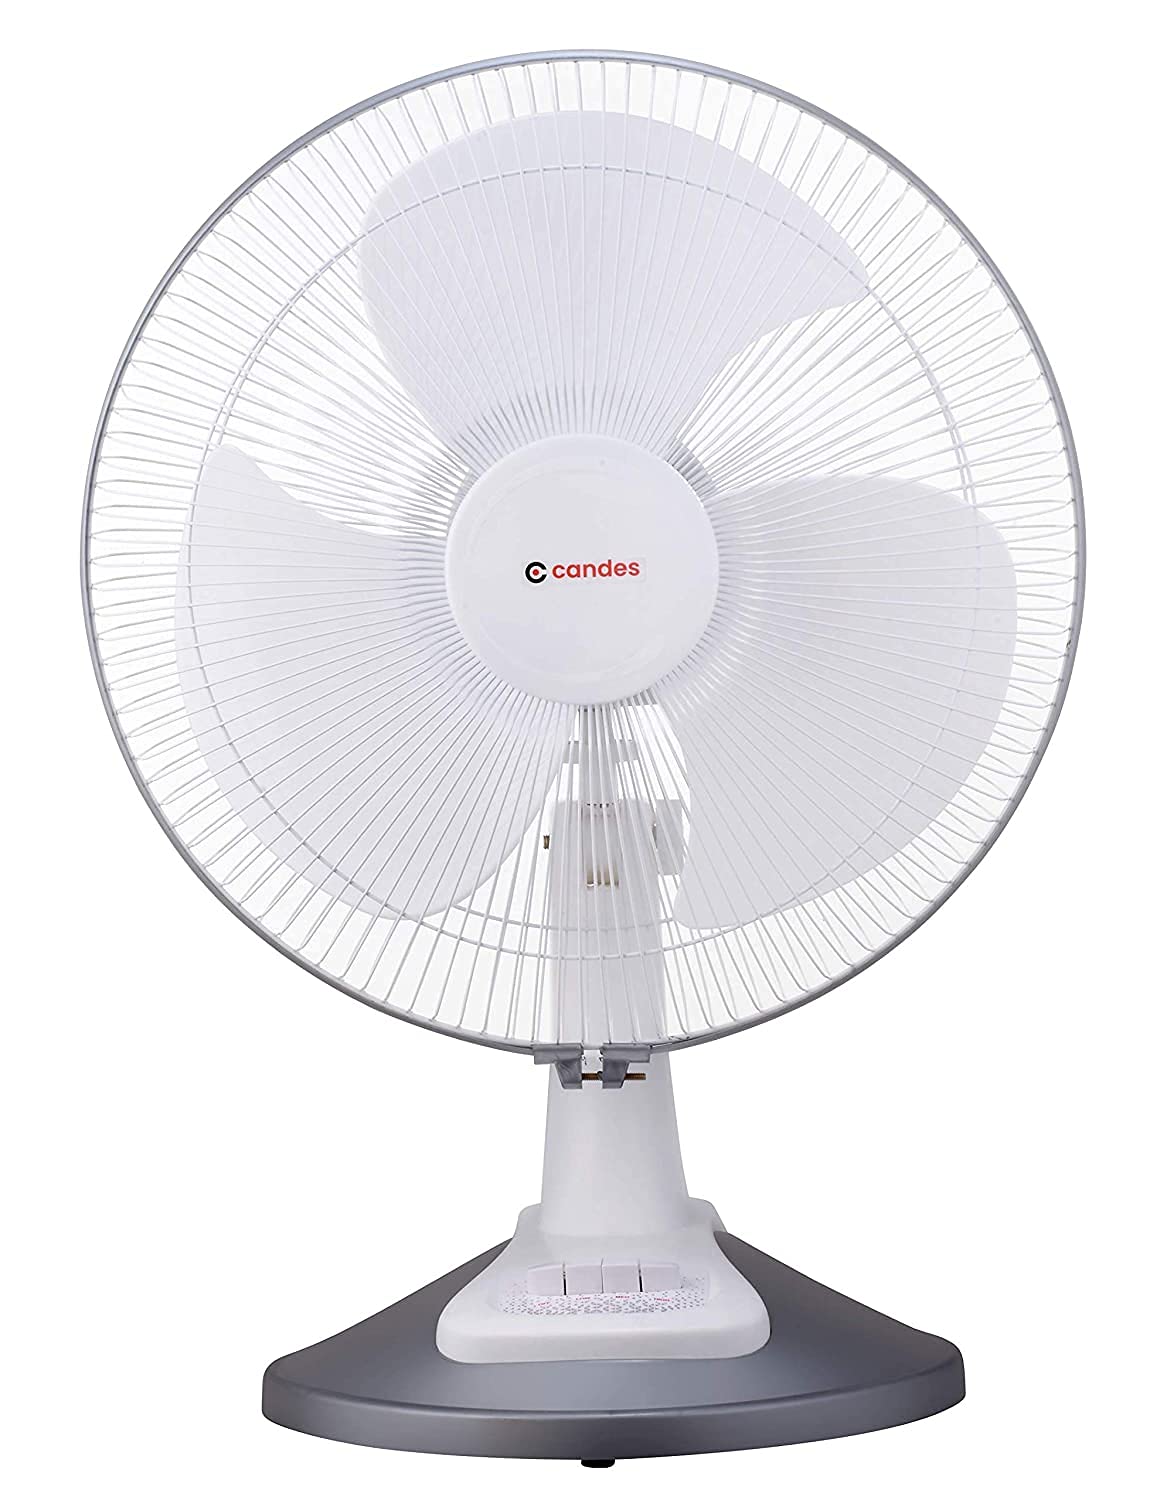 Candes Desker Table Fan for Cooling with Automatic Oscillation (400 MM) 80W (White Silver)